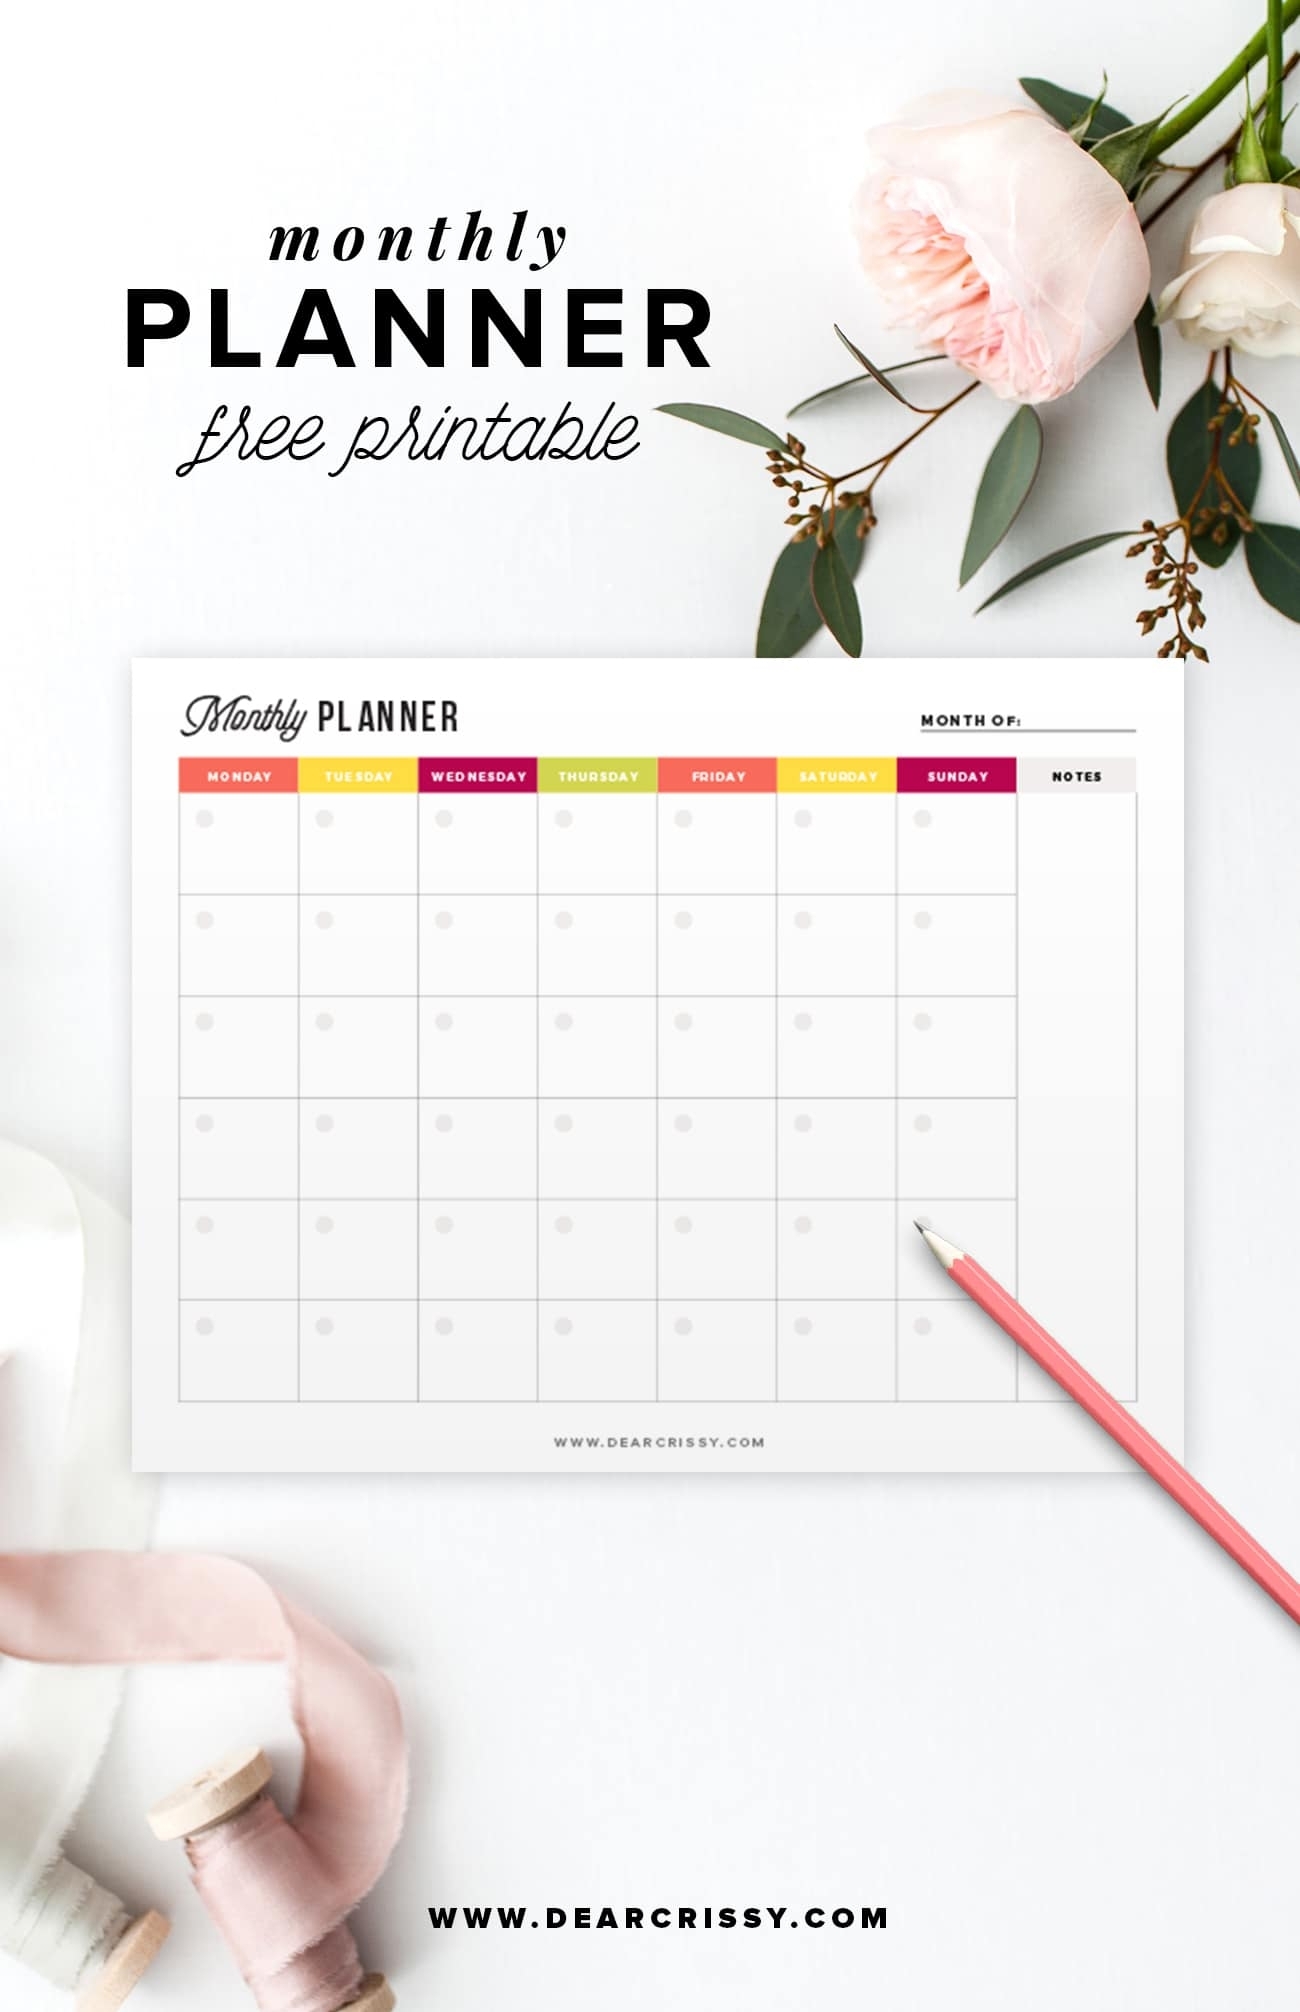 Free Printable Monthly Planner - Start Planning Your Month with Undated Free Monthly Calendar Printable Free